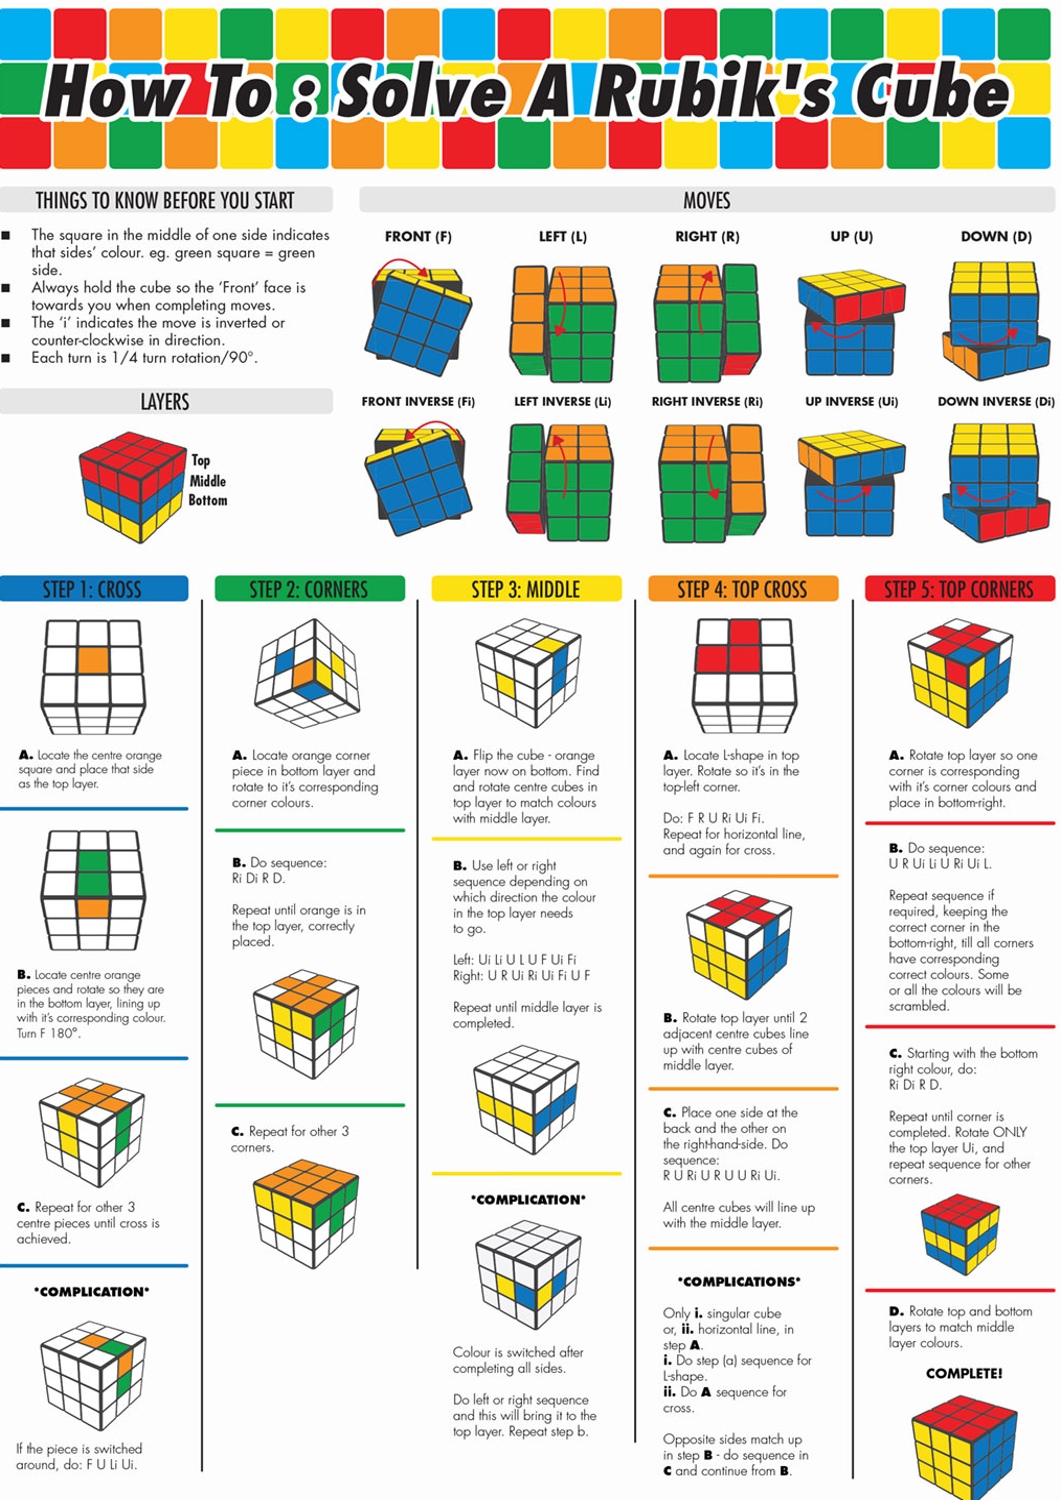 Vilje Grøn baggrund Som regel How To Solve A Rubik's Cube: The Definitive Guide | Daily Infographic